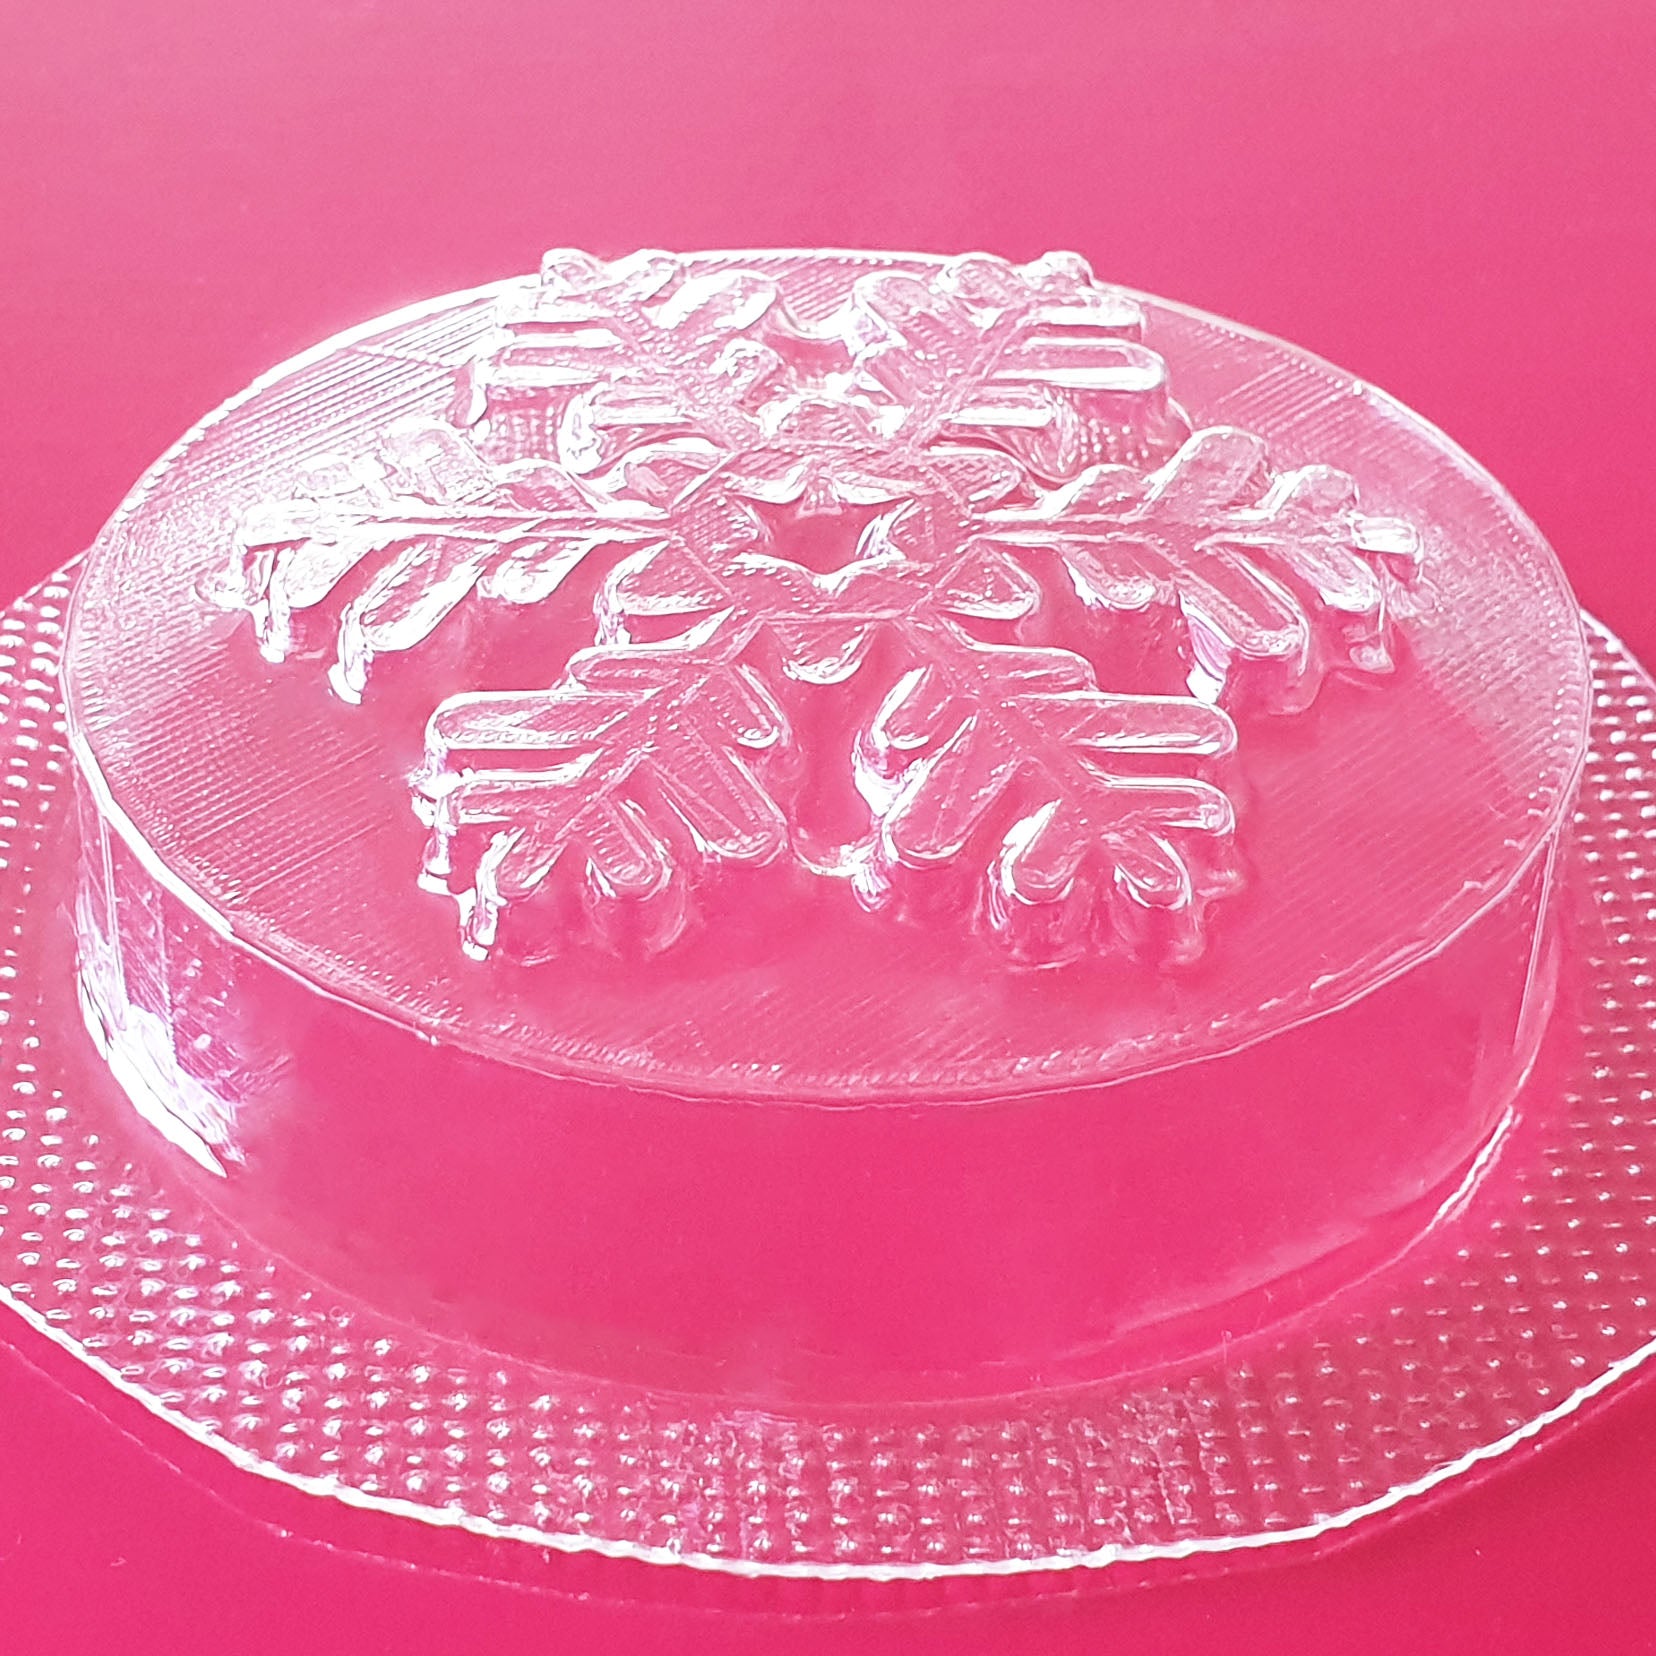 Snowflake Disc Mould | Truly Personal | Bath Bomb, Soap, Resin, Chocolate, Jelly, Wax Melts Mold